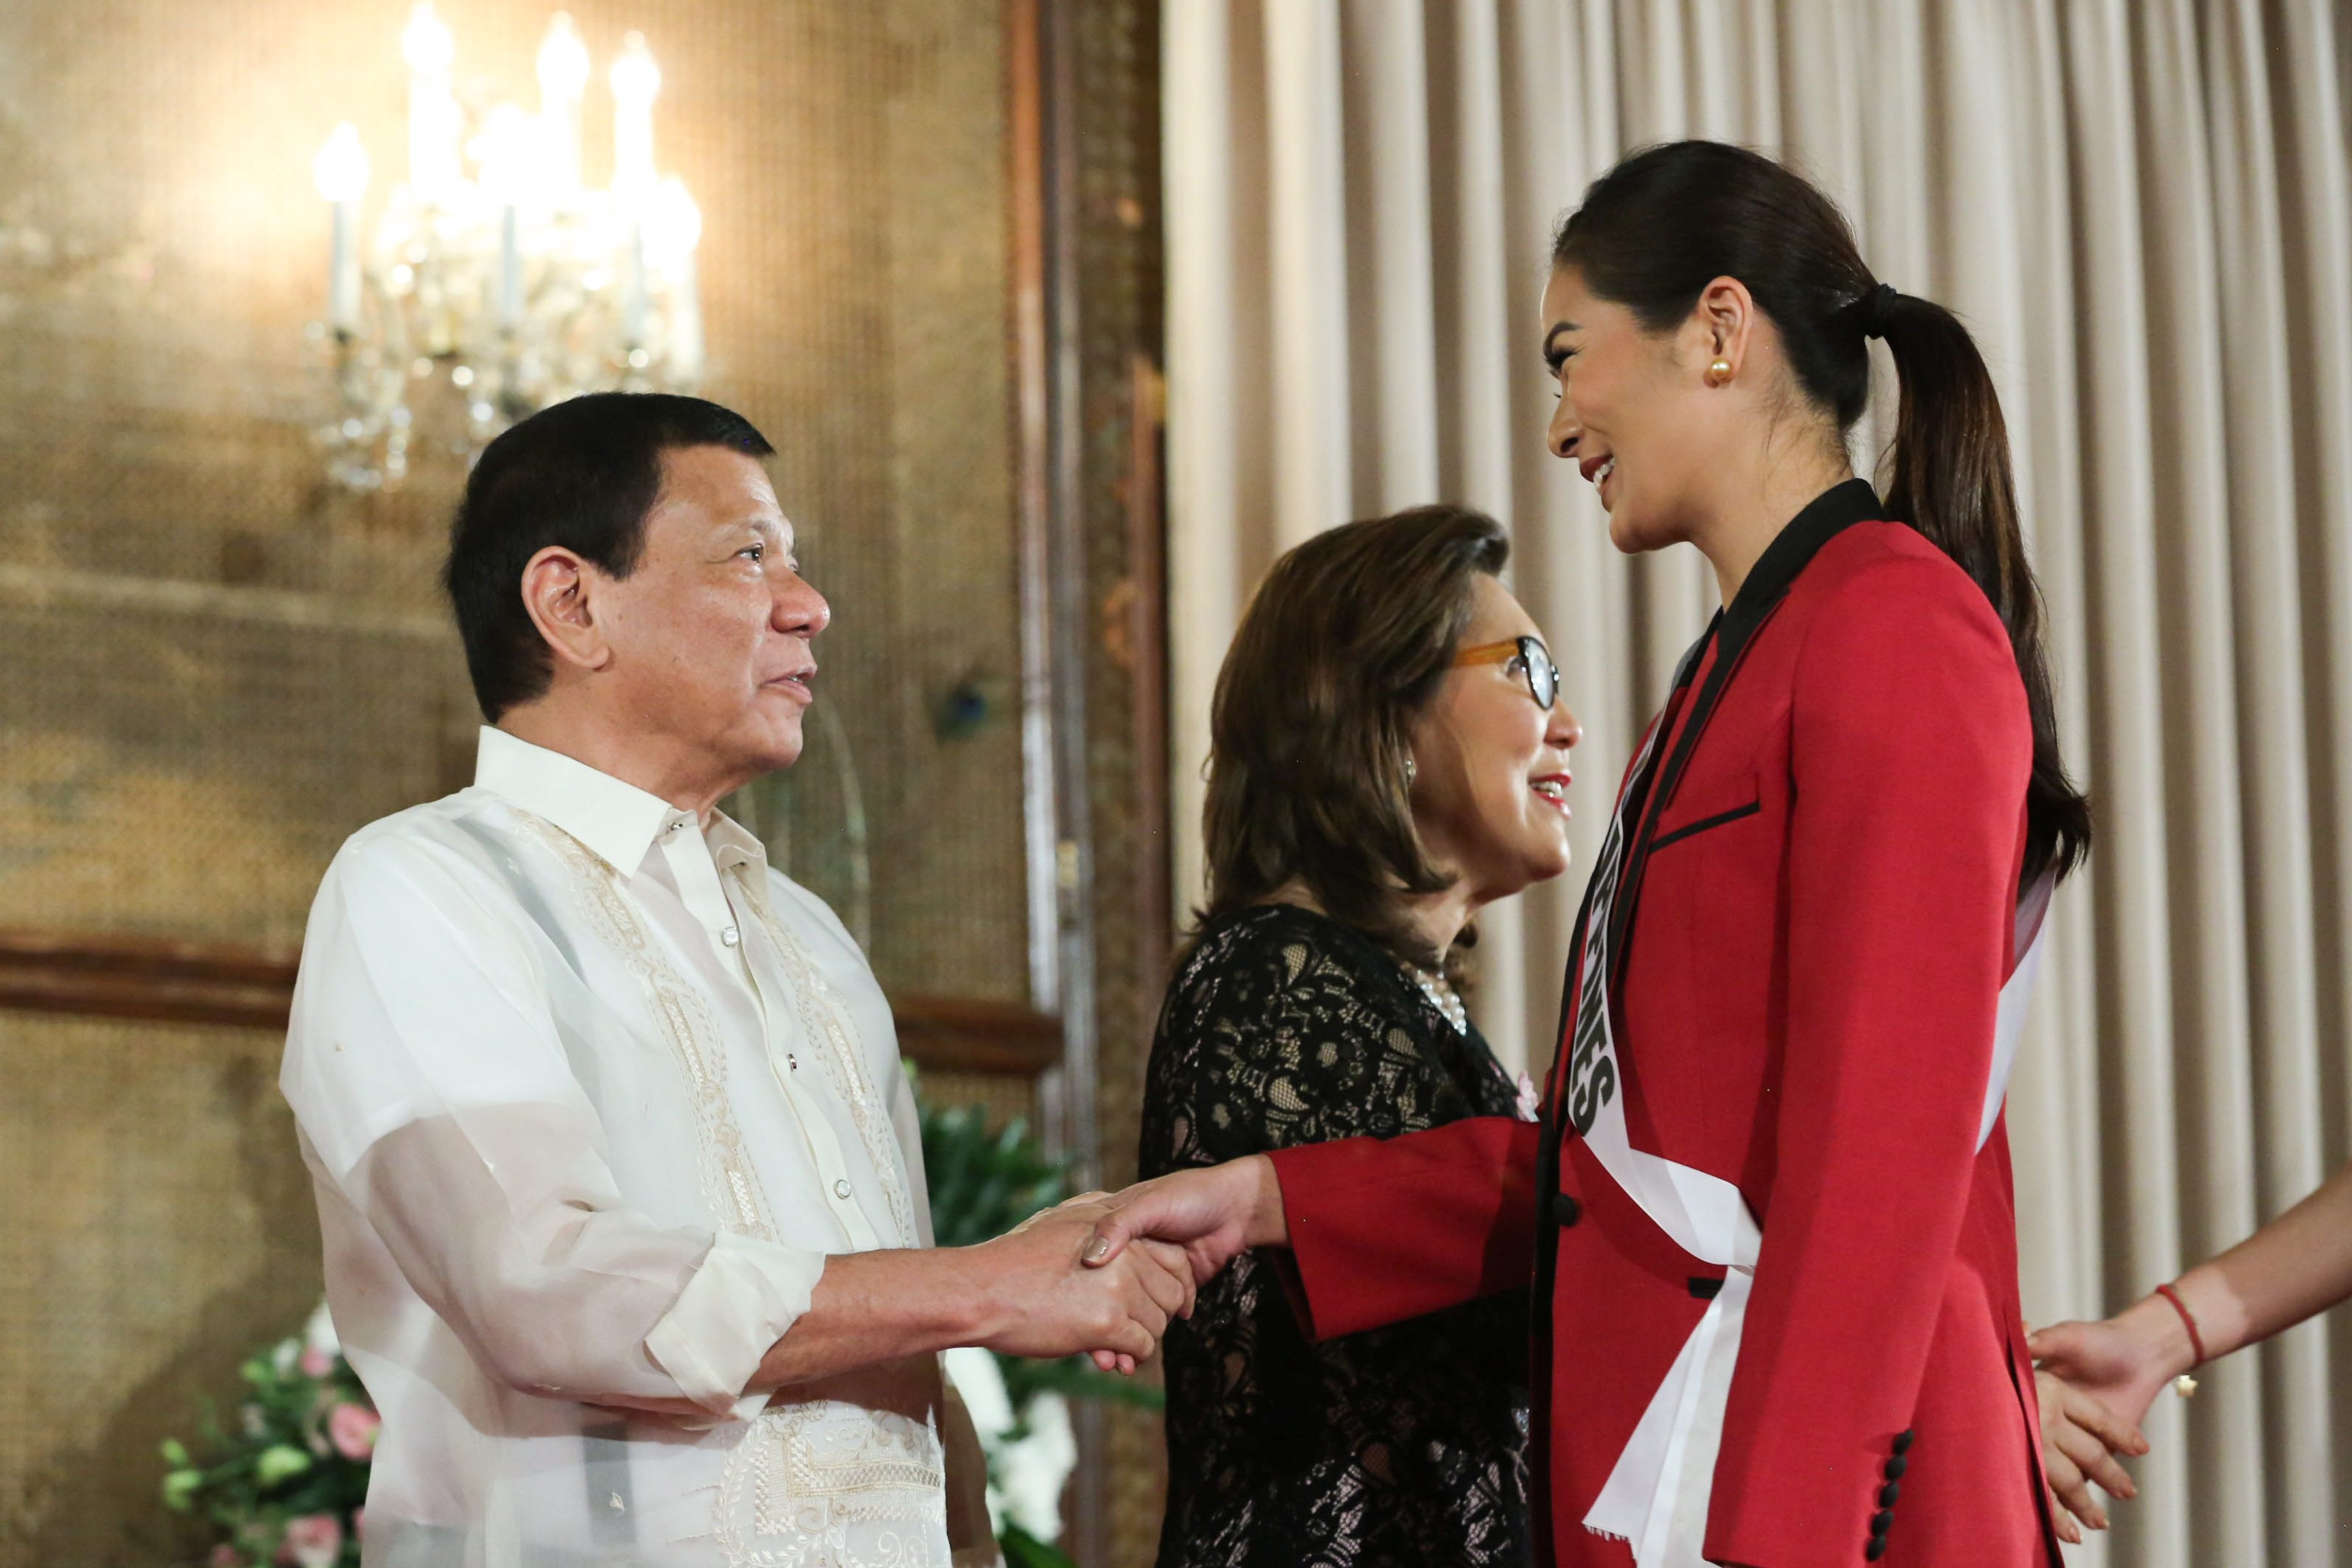 PAGEANT HOST. President Rodrigo Duterte shakes hands with Miss Philippines 2016 Maxine Medina during the courtesy call of Miss Universe candidates at the Palace. Malacañang photo  